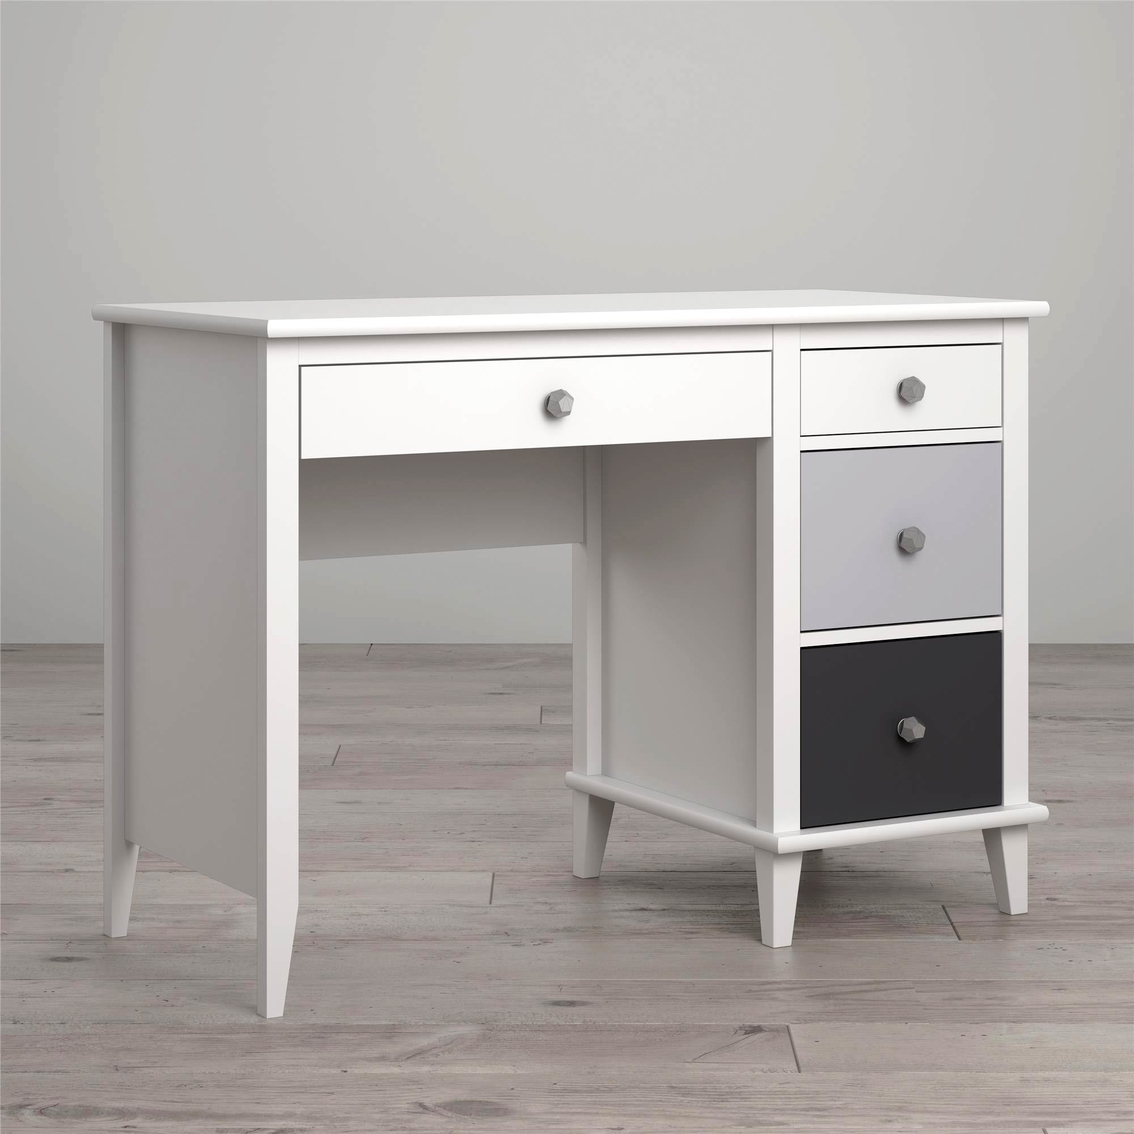 Little Seeds Monarch Hill Poppy Kids' White Desk Grey Drawers - Image 2 of 3